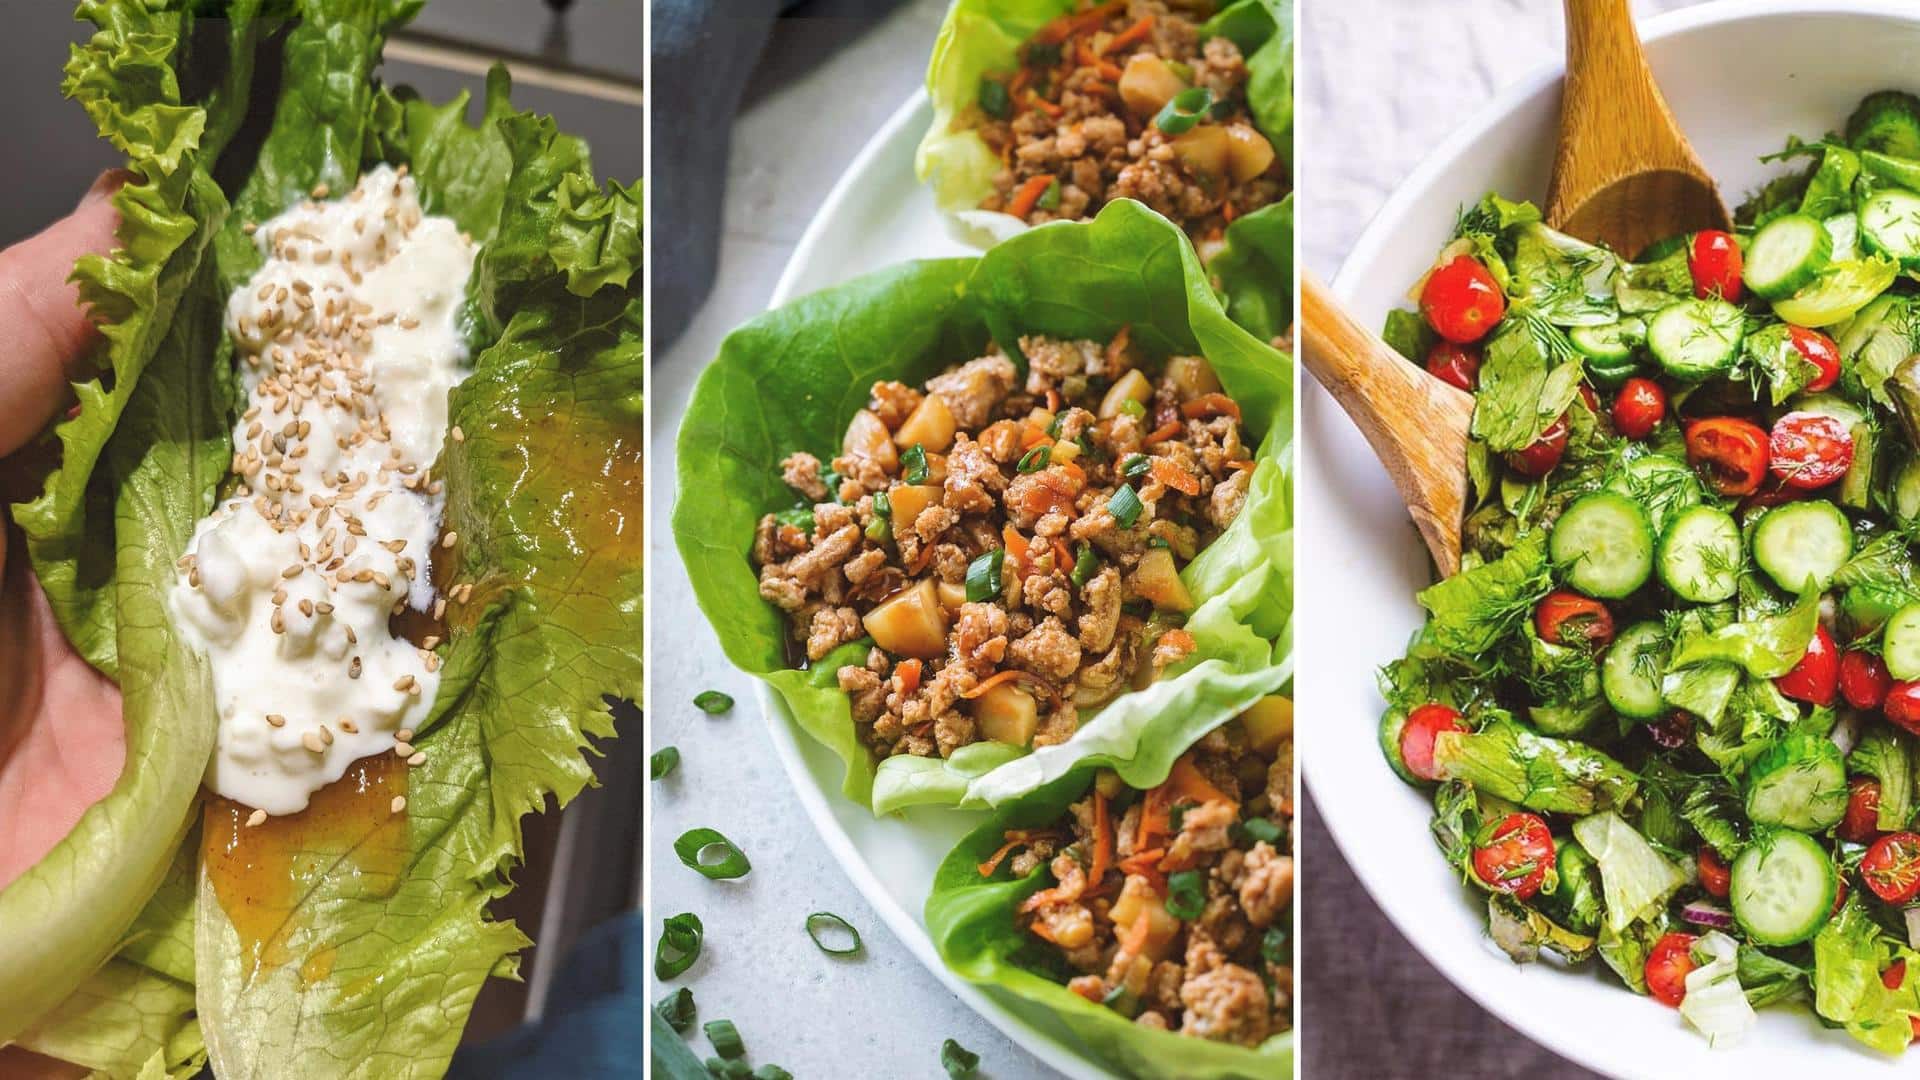 Lettuce Month: Celebrate May with recipes featuring this green veggie